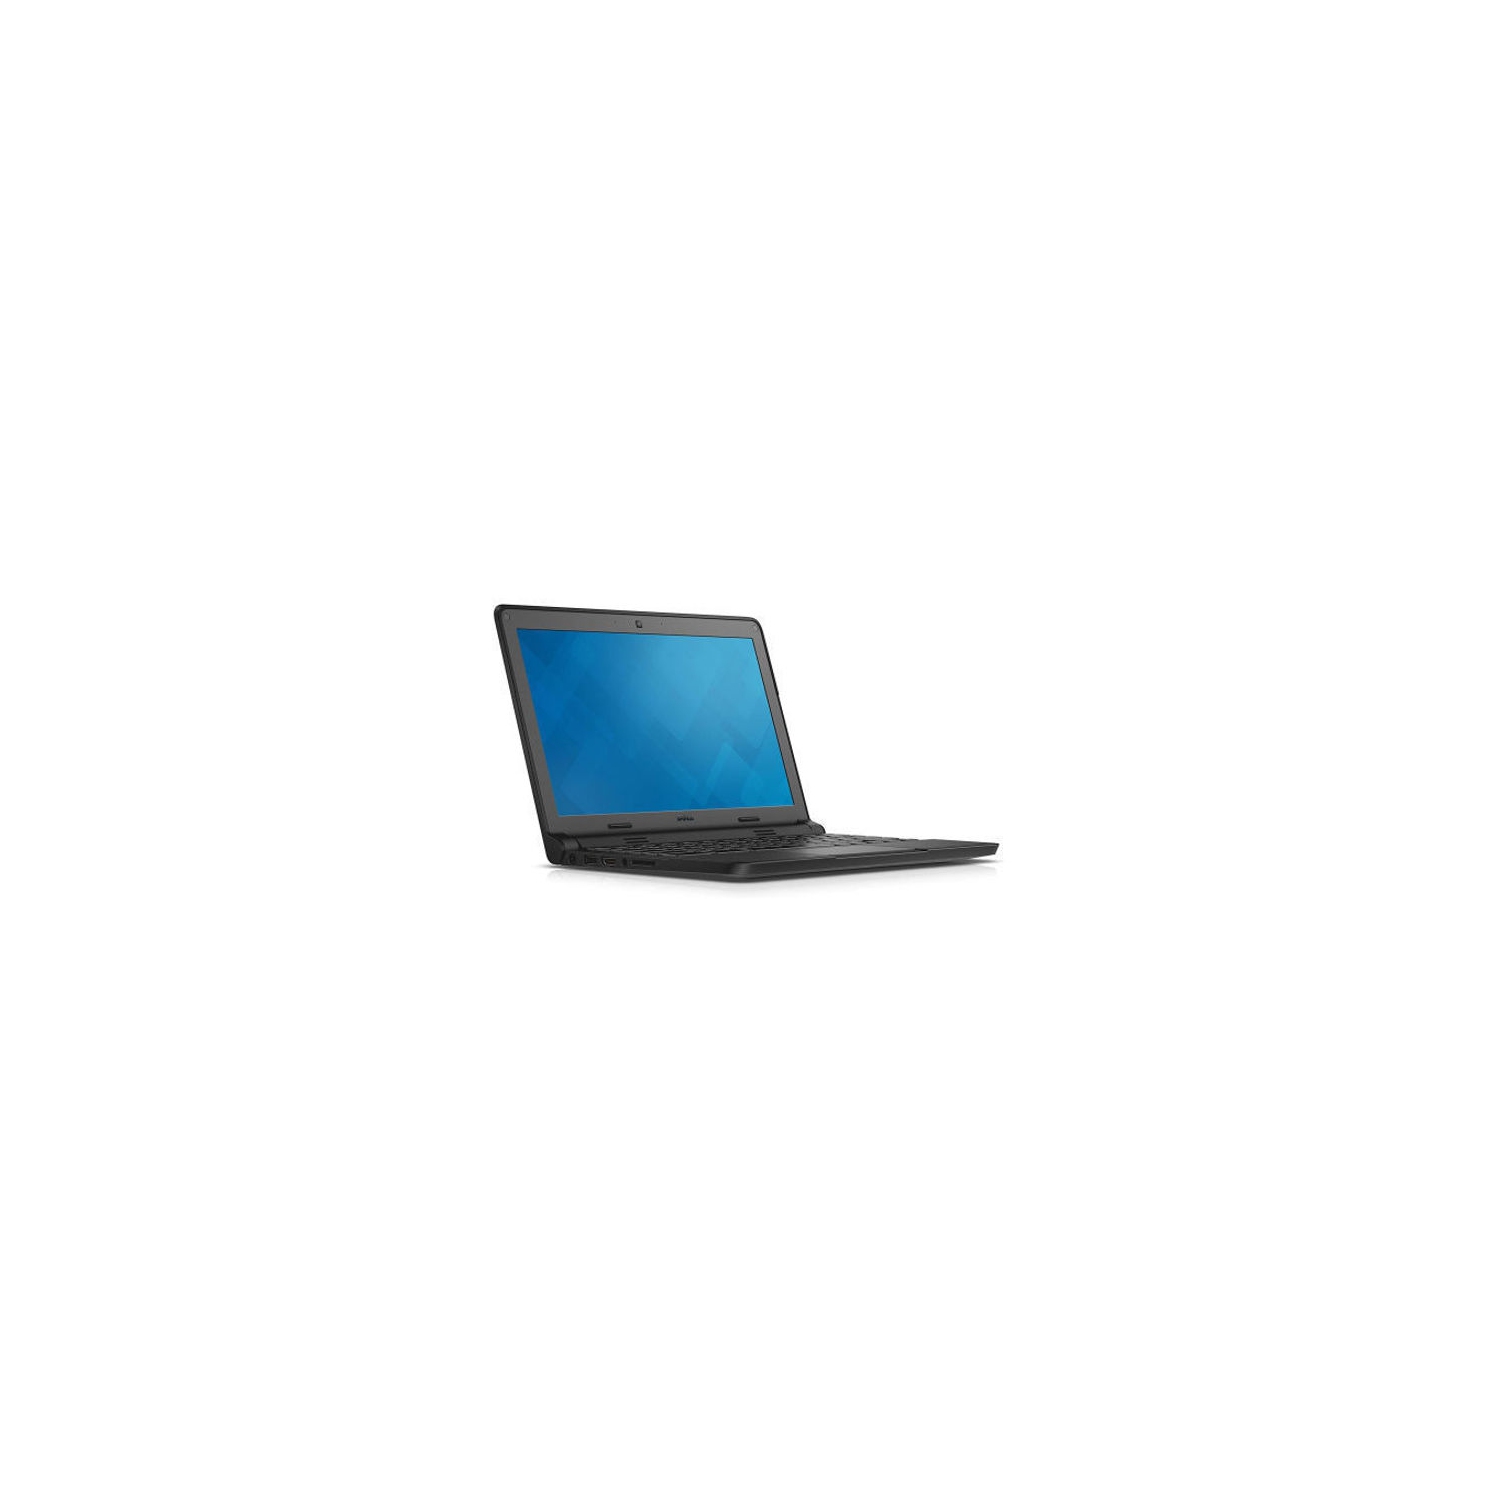 Refurbished (Excellent) - Dell 11-3120 11.6" Chromebook (Intel Celeron N2840 2.16GHz+ Dual Core/16GB SSD/4GB RAM/Chrome OS) - Certified Refurbished